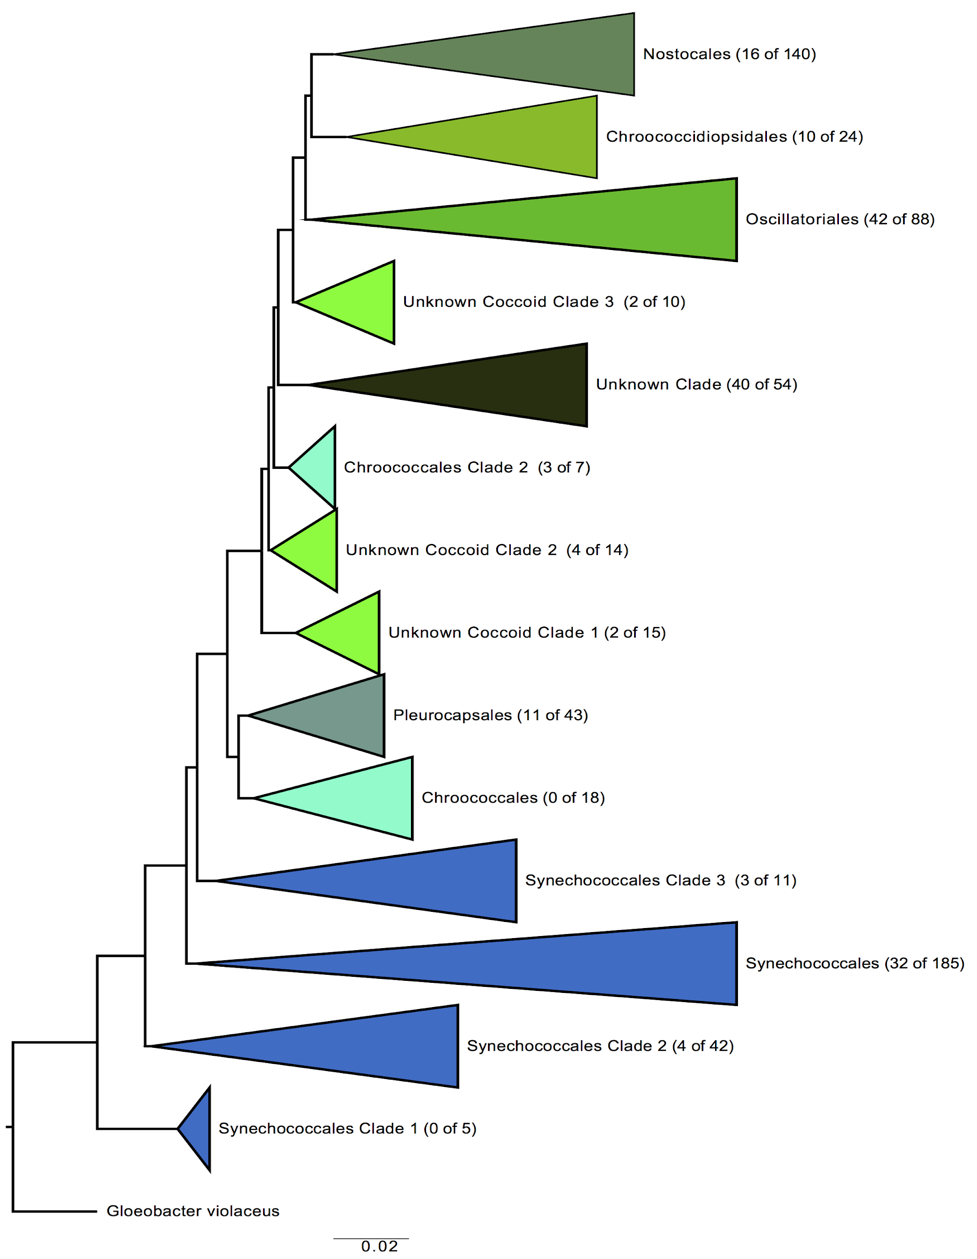 A branching model shows the phylogenetic tree of the major cyanobacterial clades.